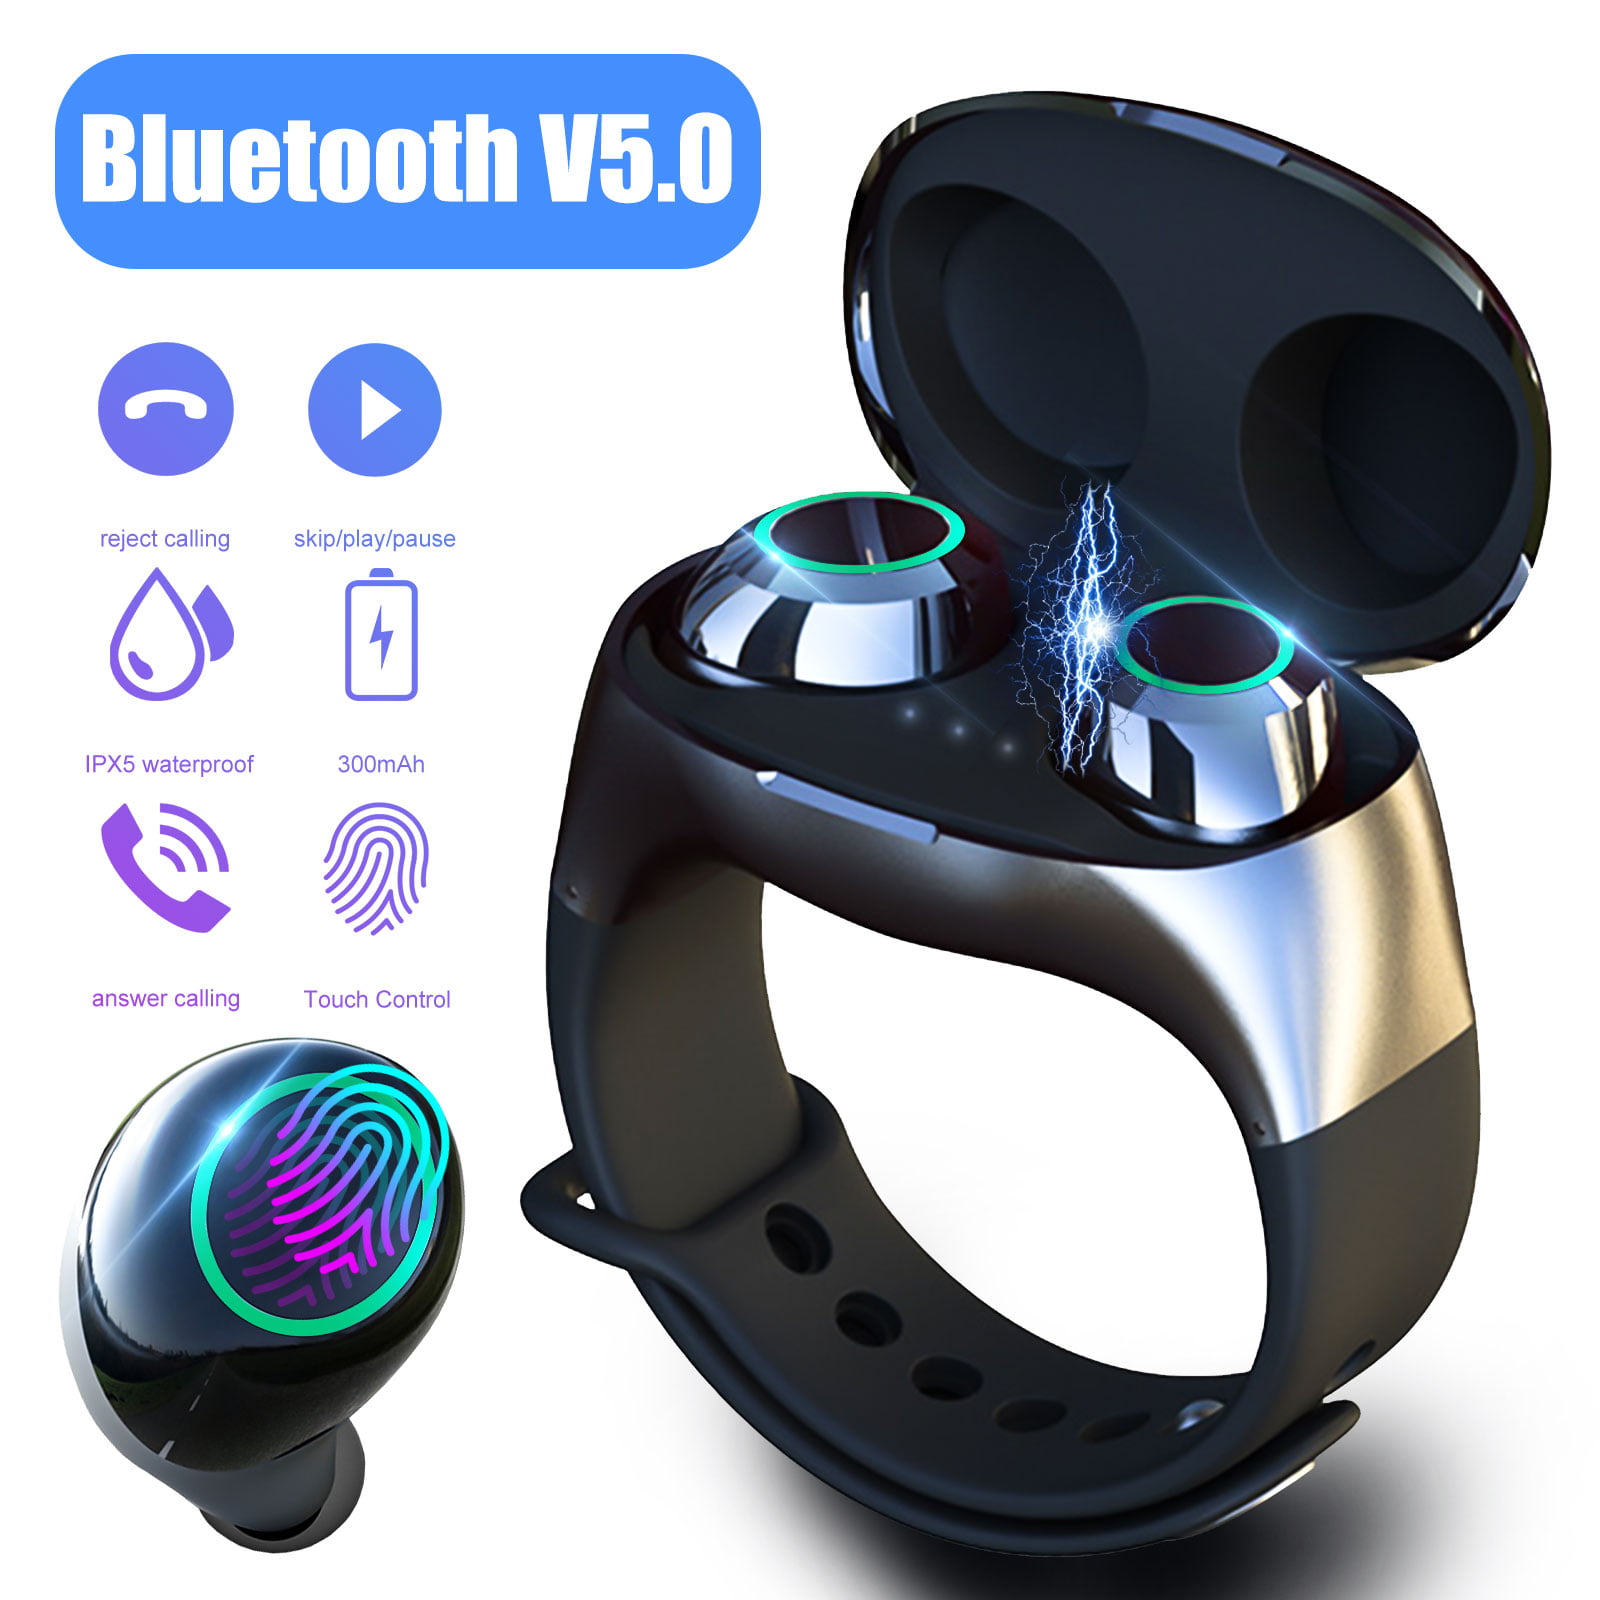 2020 Smart Watch With Wireless Earbuds, Bluetooth 5.0 Earbuds Mini